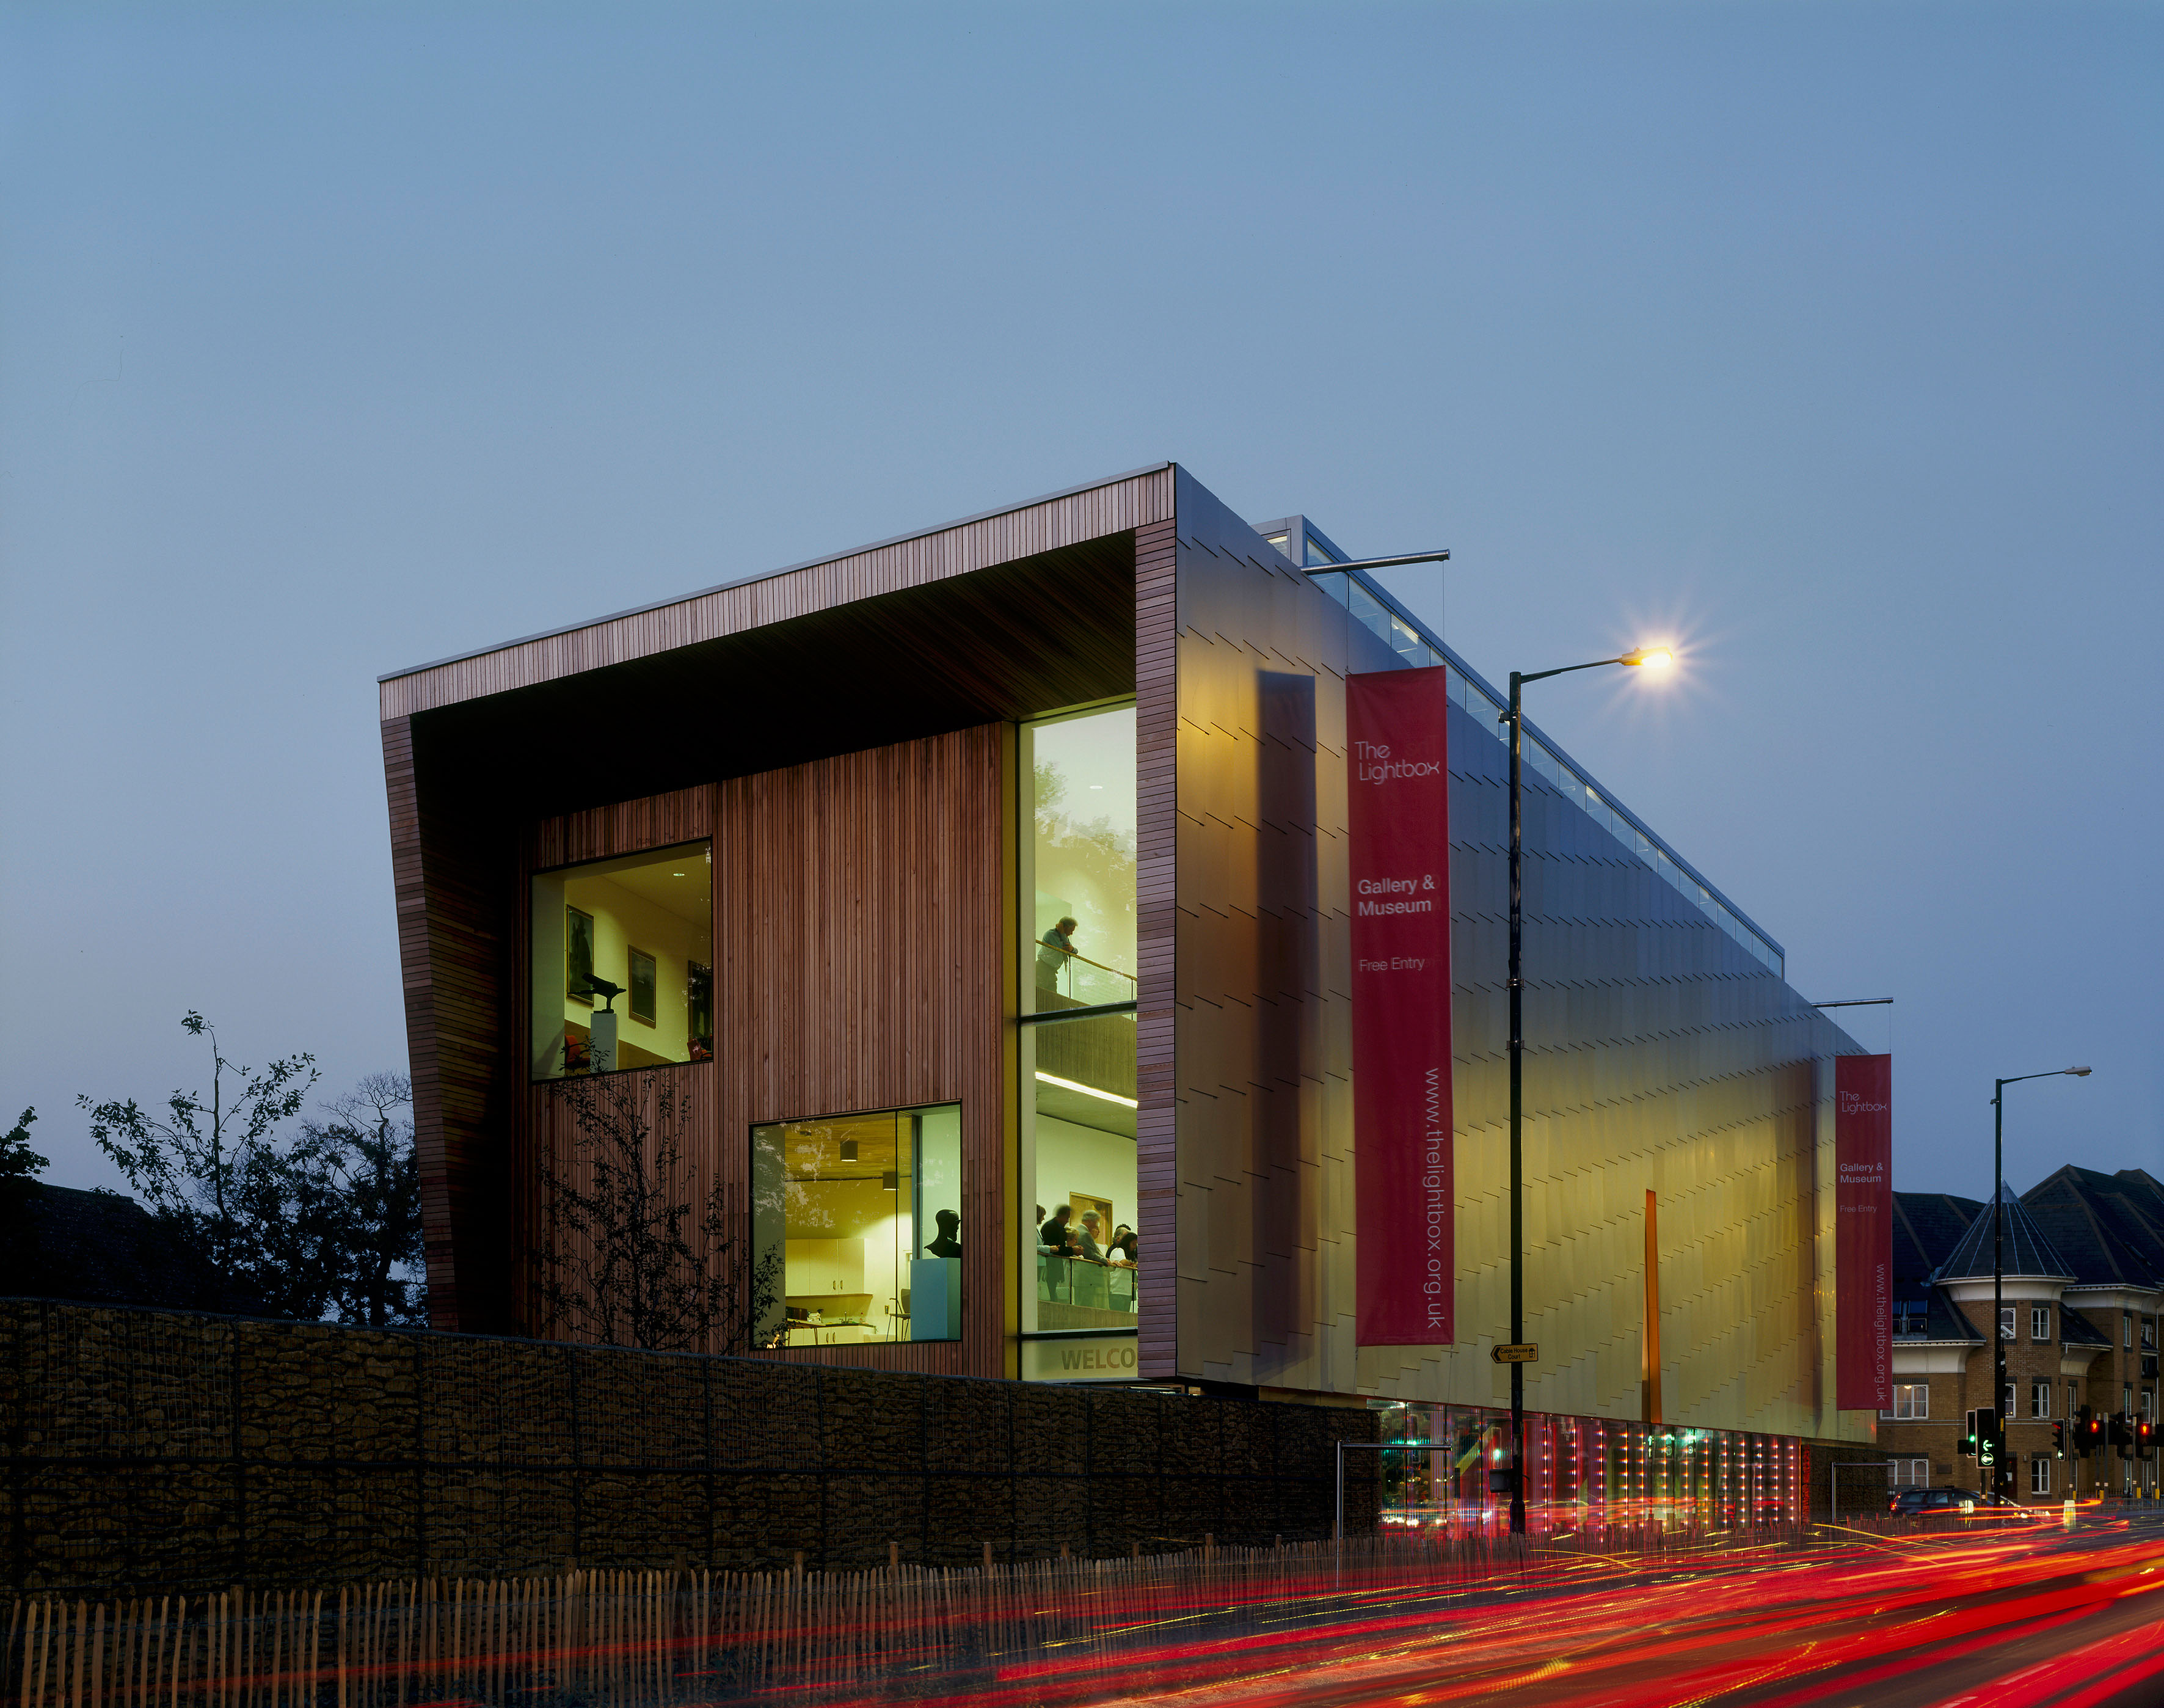 The Lightbox in Woking, UK is a cultural space that holds three galleries with a range of exhibitions that change regularly. It features the Ingram Collection, which was used in the mental health study.